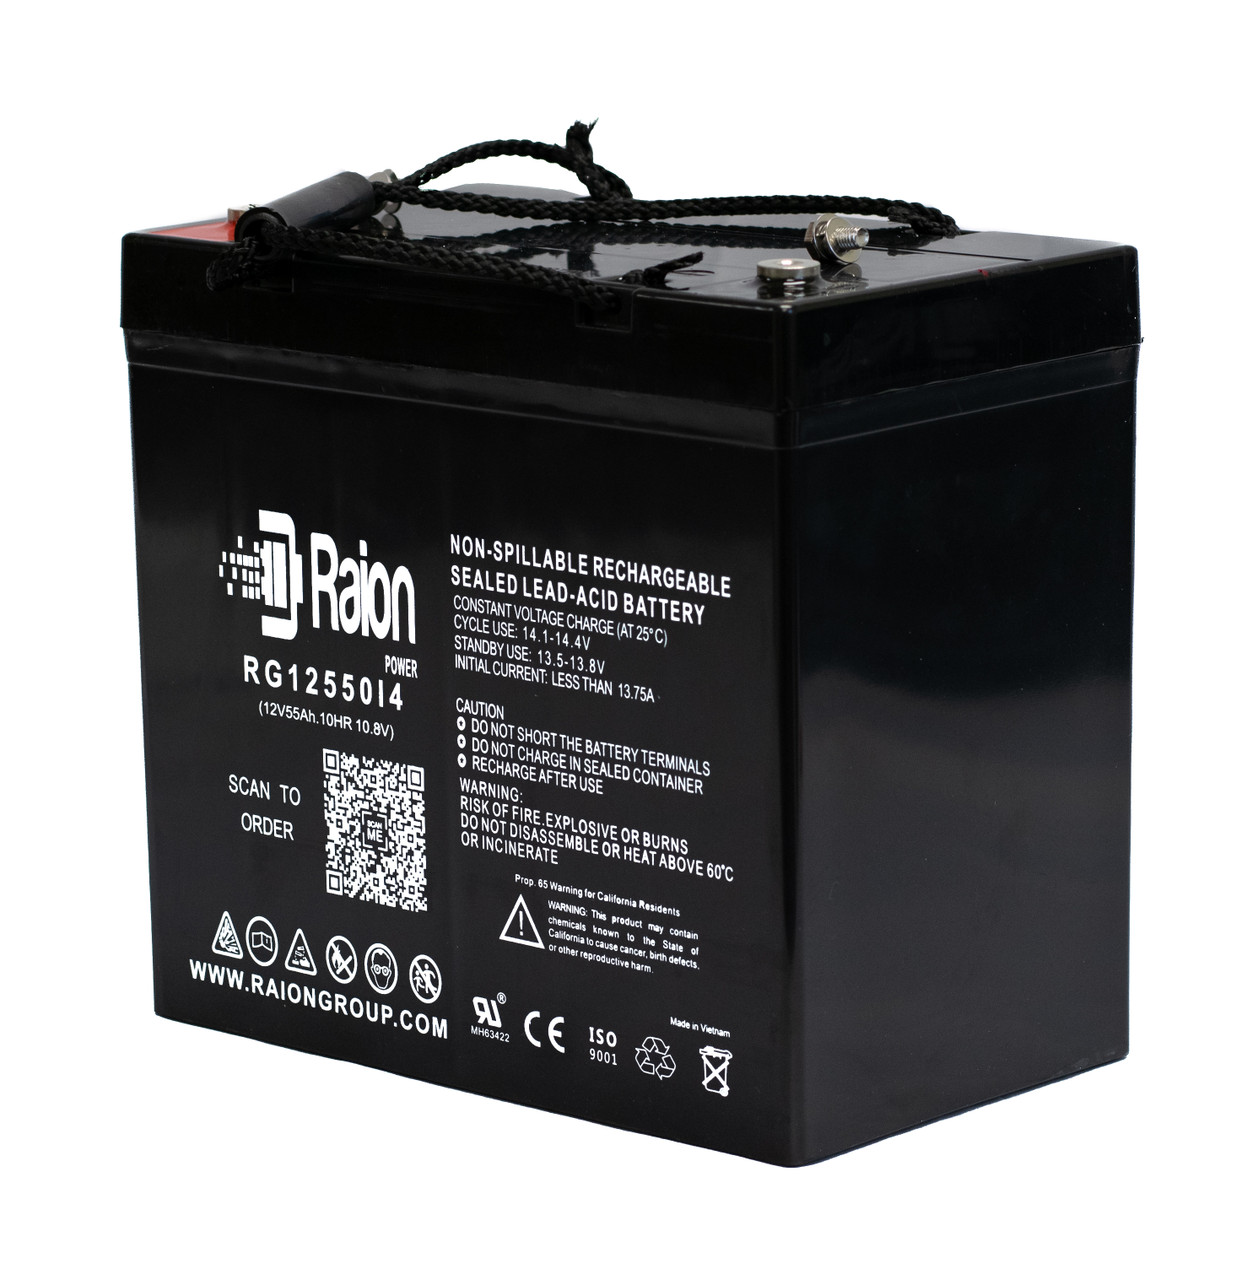 Raion Power 12V 55Ah 22NF Mobility Scooter Battery Replacement for Shoprider Sprinter Deluxe